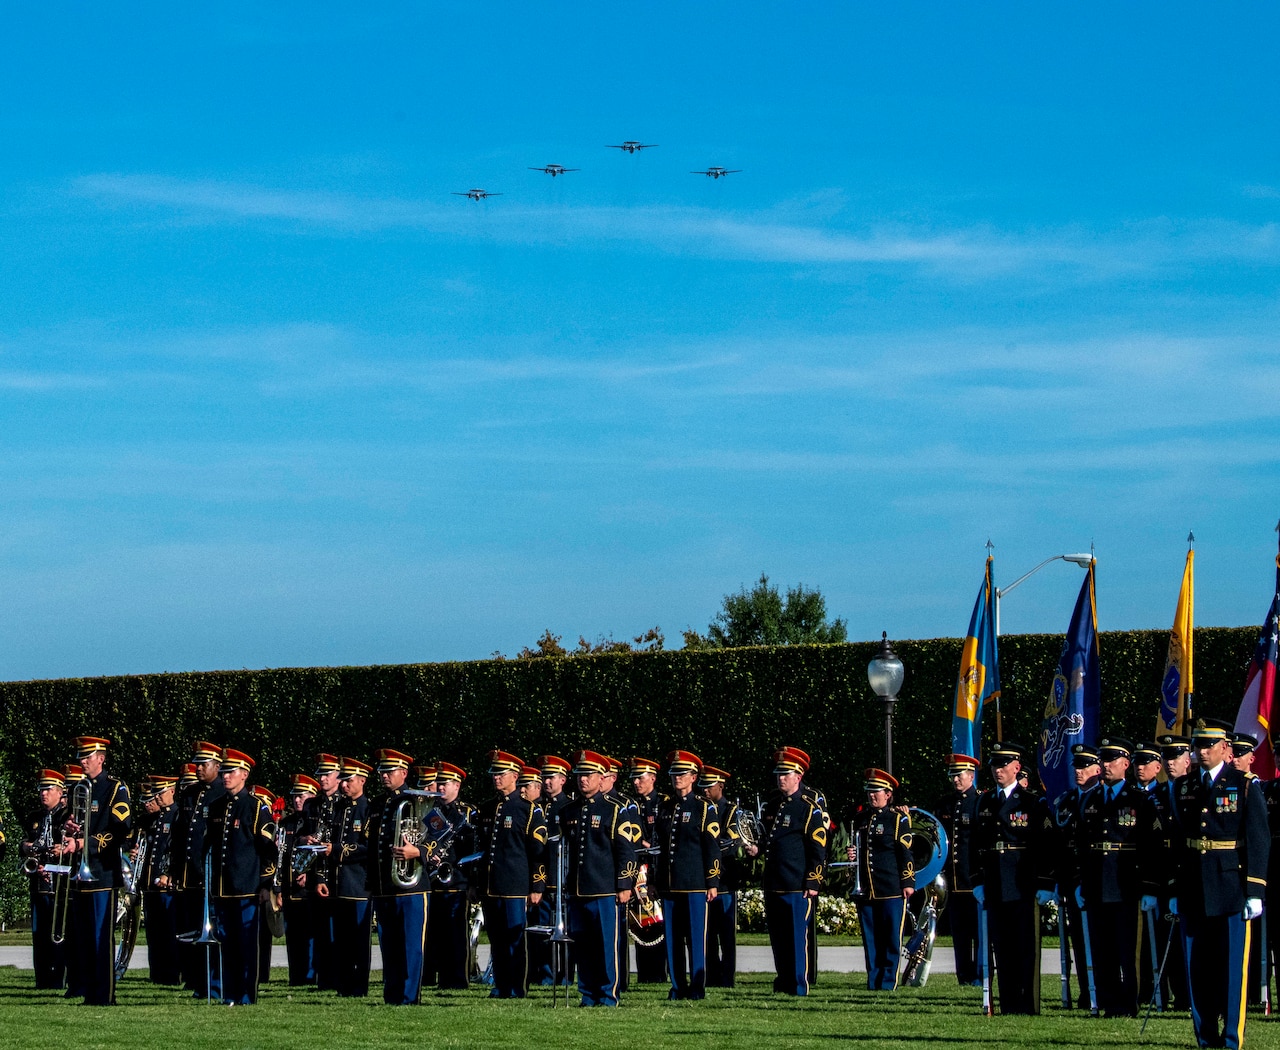 Military aircraft fly over a joint service color guard.